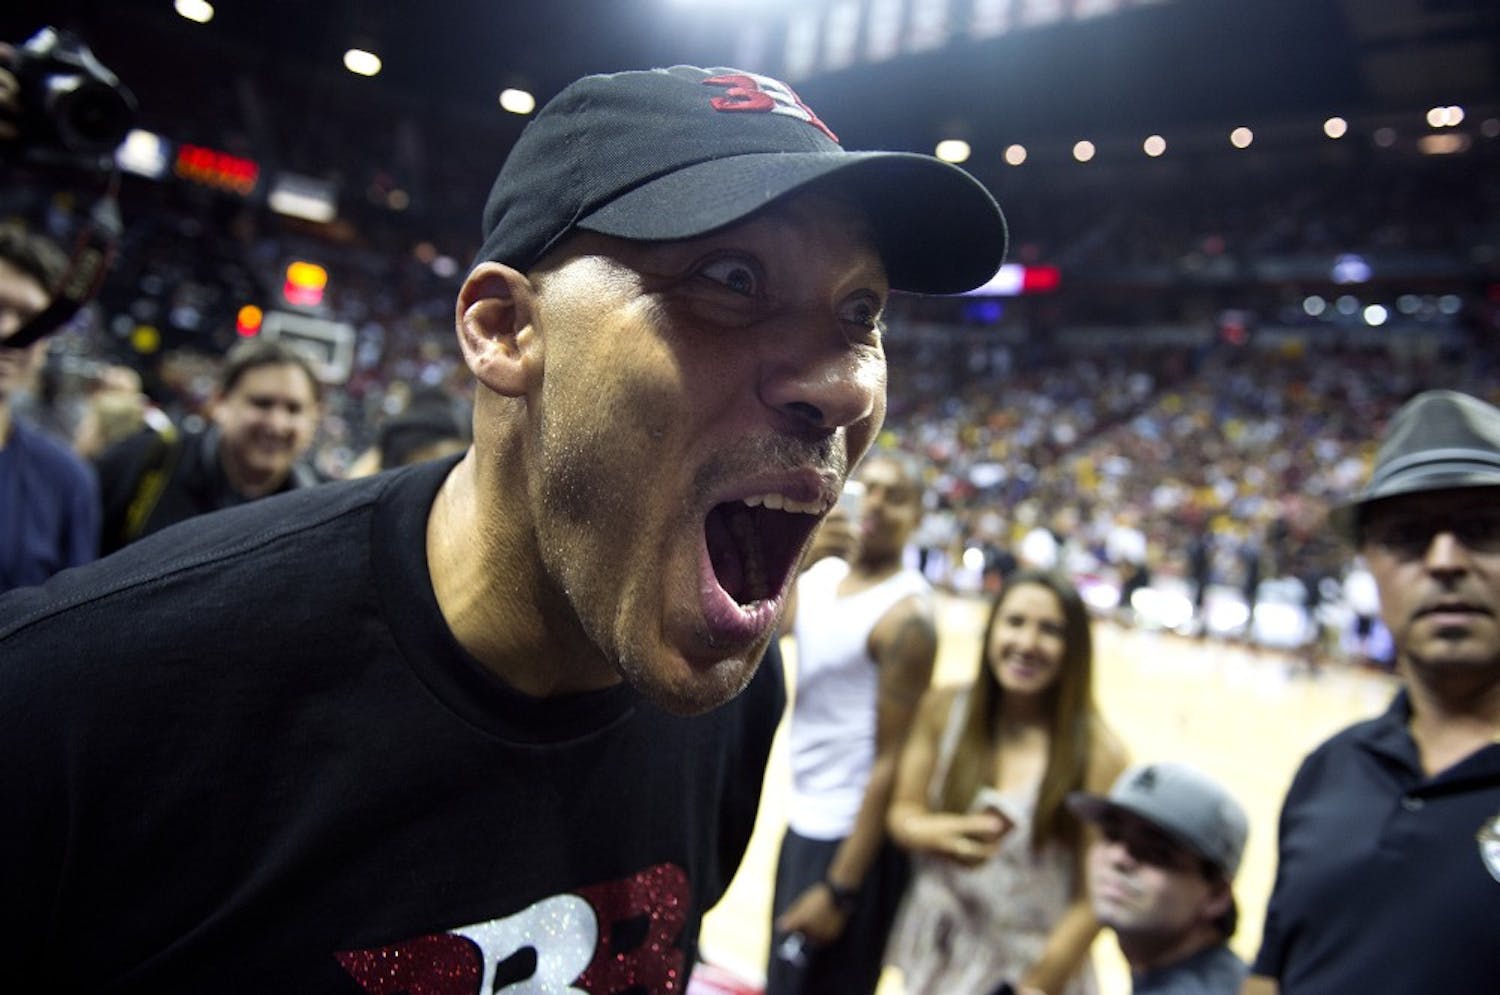 LaVar Ball greets fans during halftime on July 7, 2017 at the NBA Summer League in Las Vegas, Nev.&nbsp;